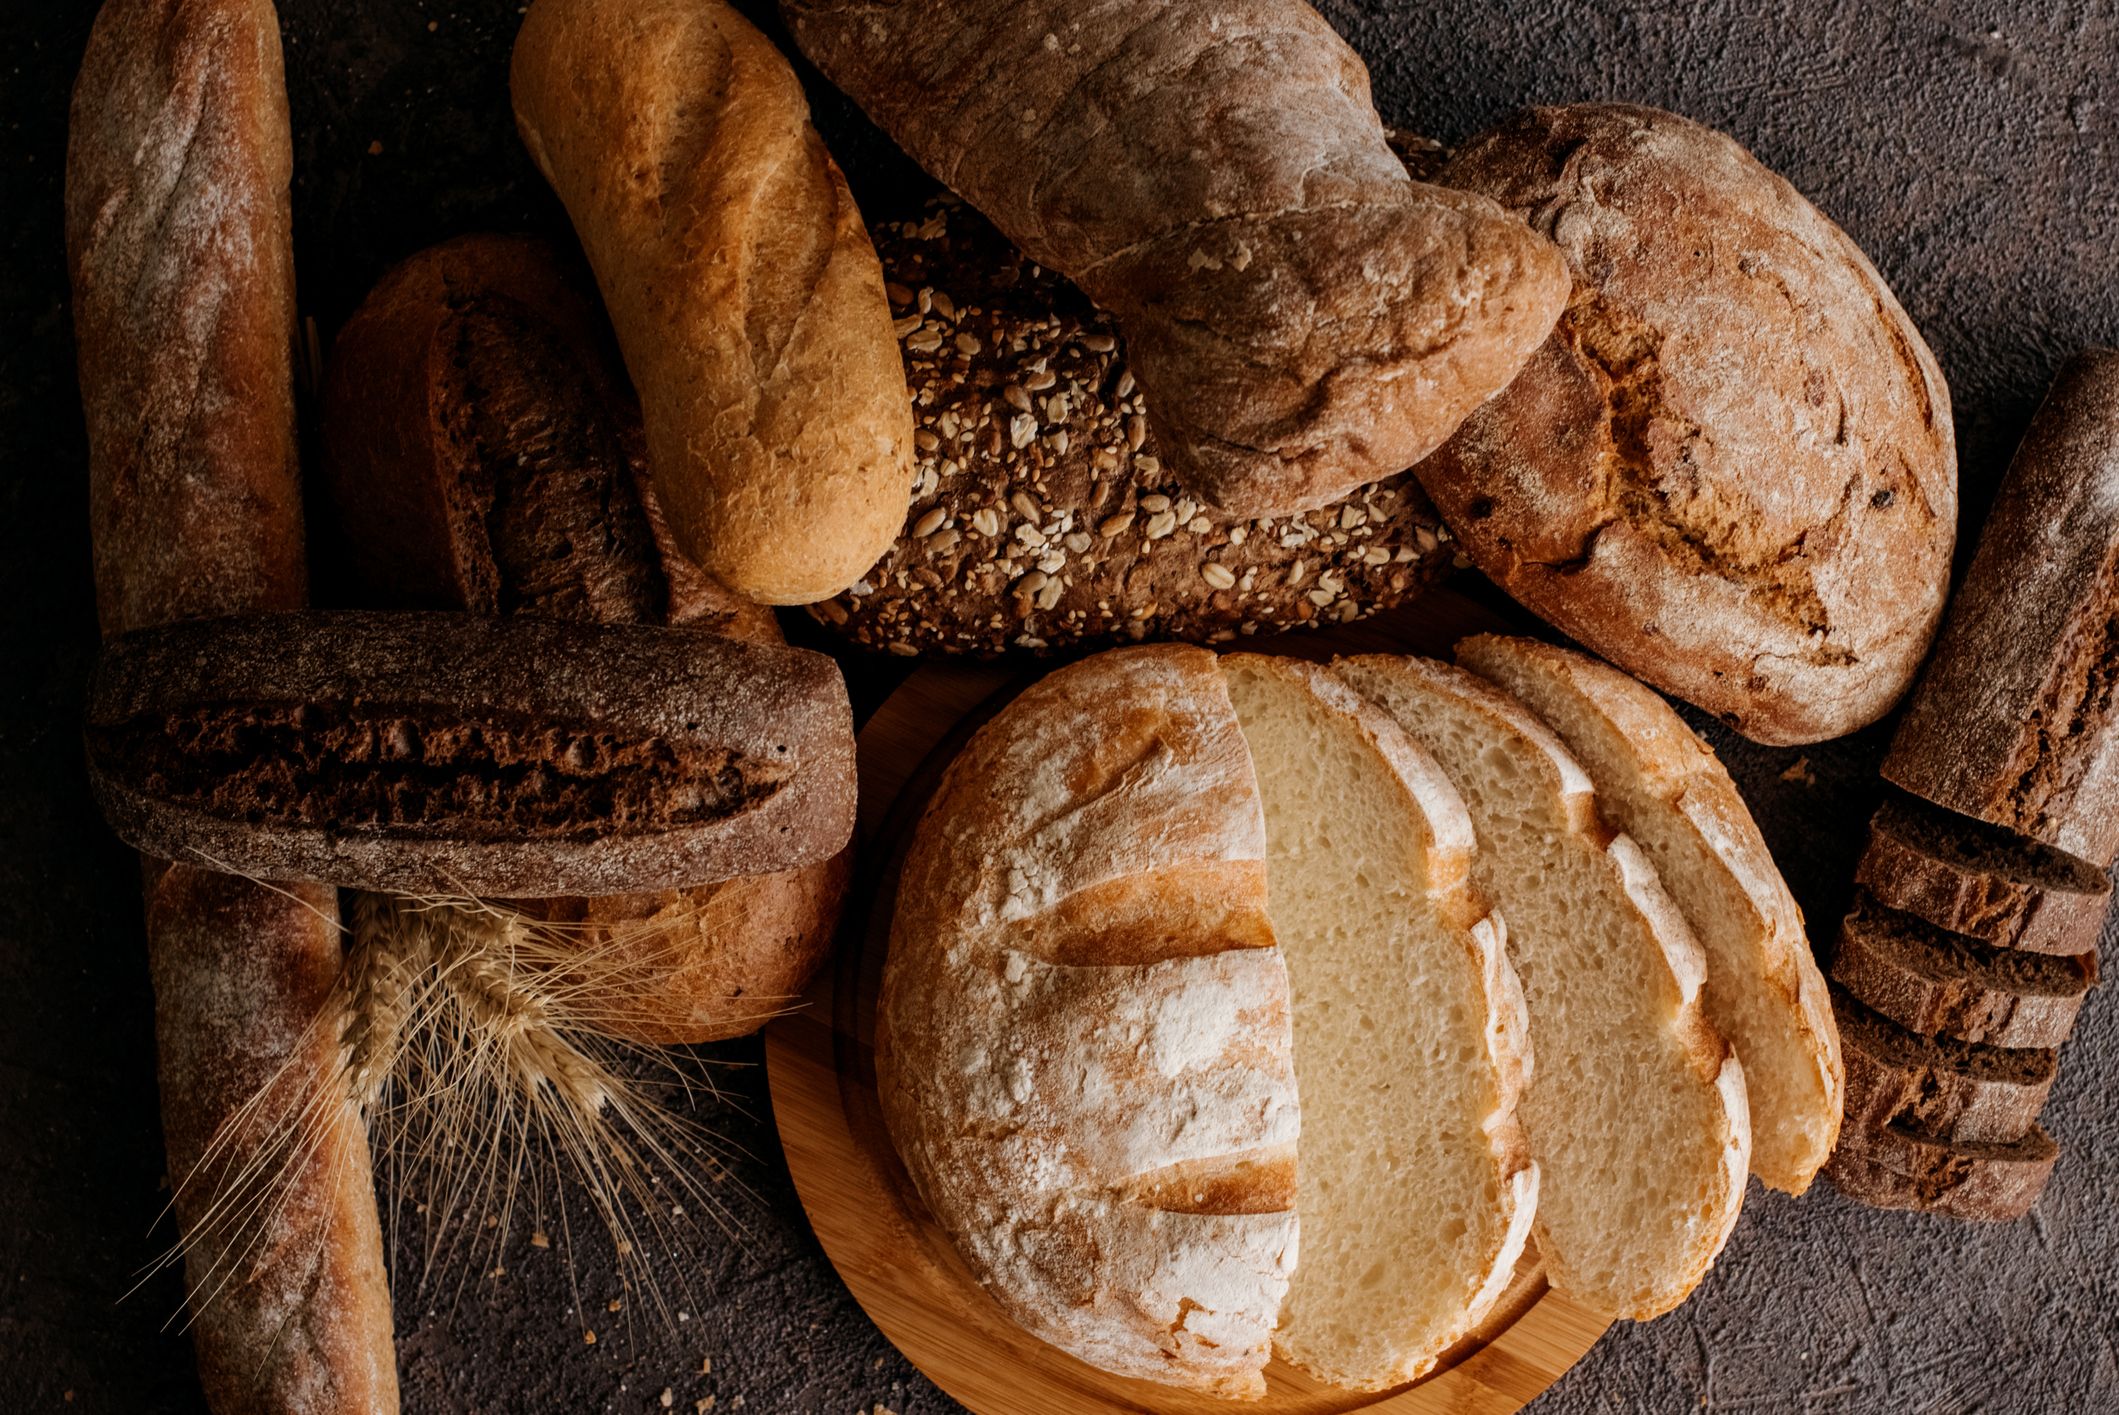 Healthy Bread Options: How To Pick The Best Bread For You